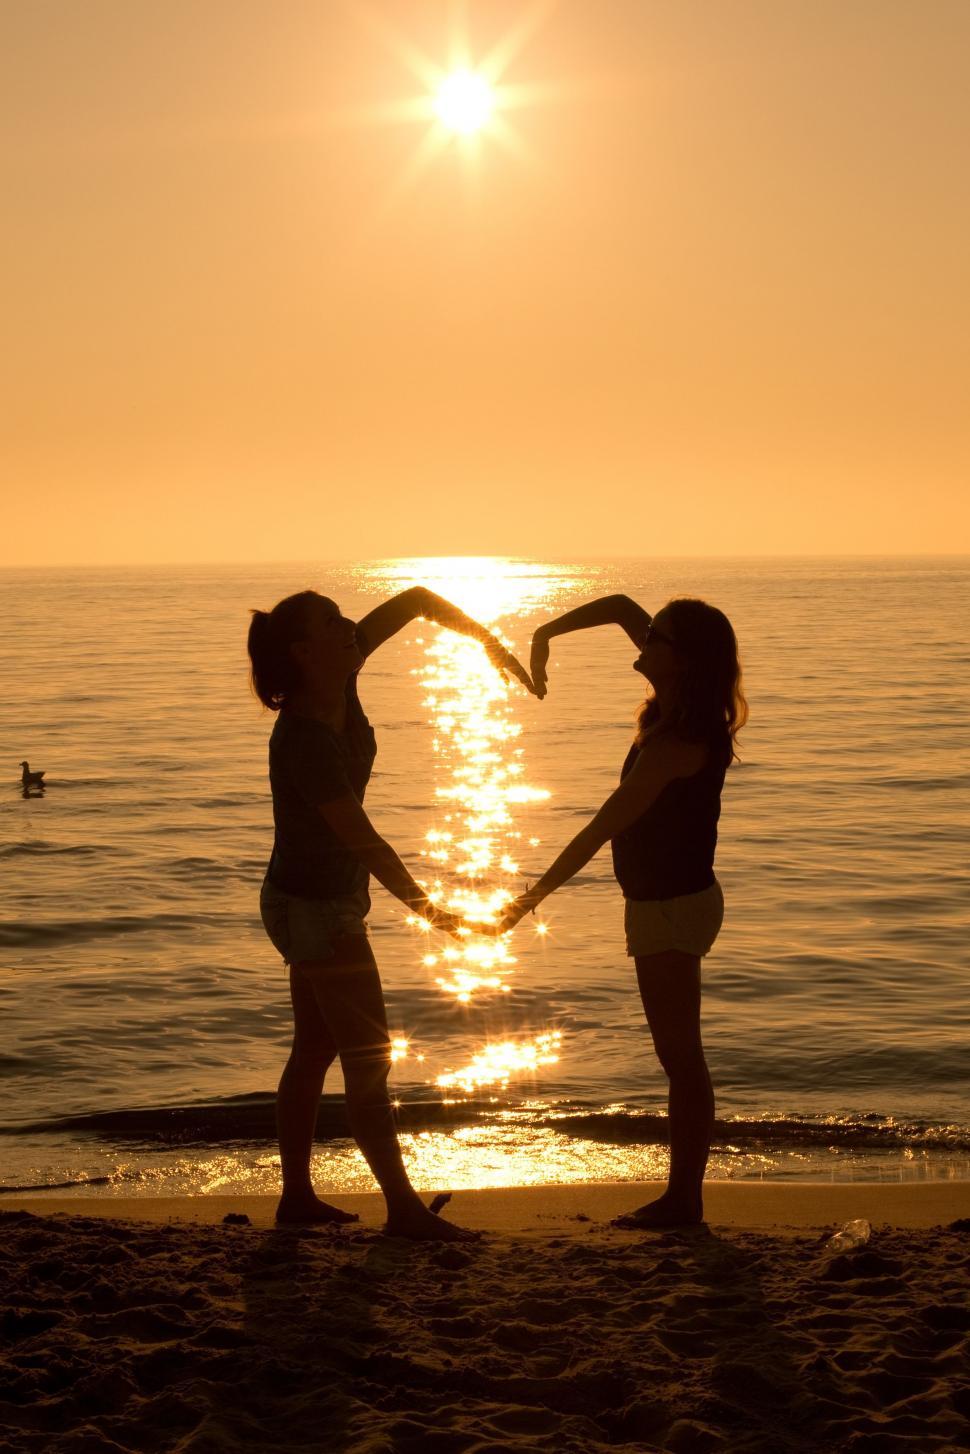 Free Image of Two women making heart with sunset and ocean 